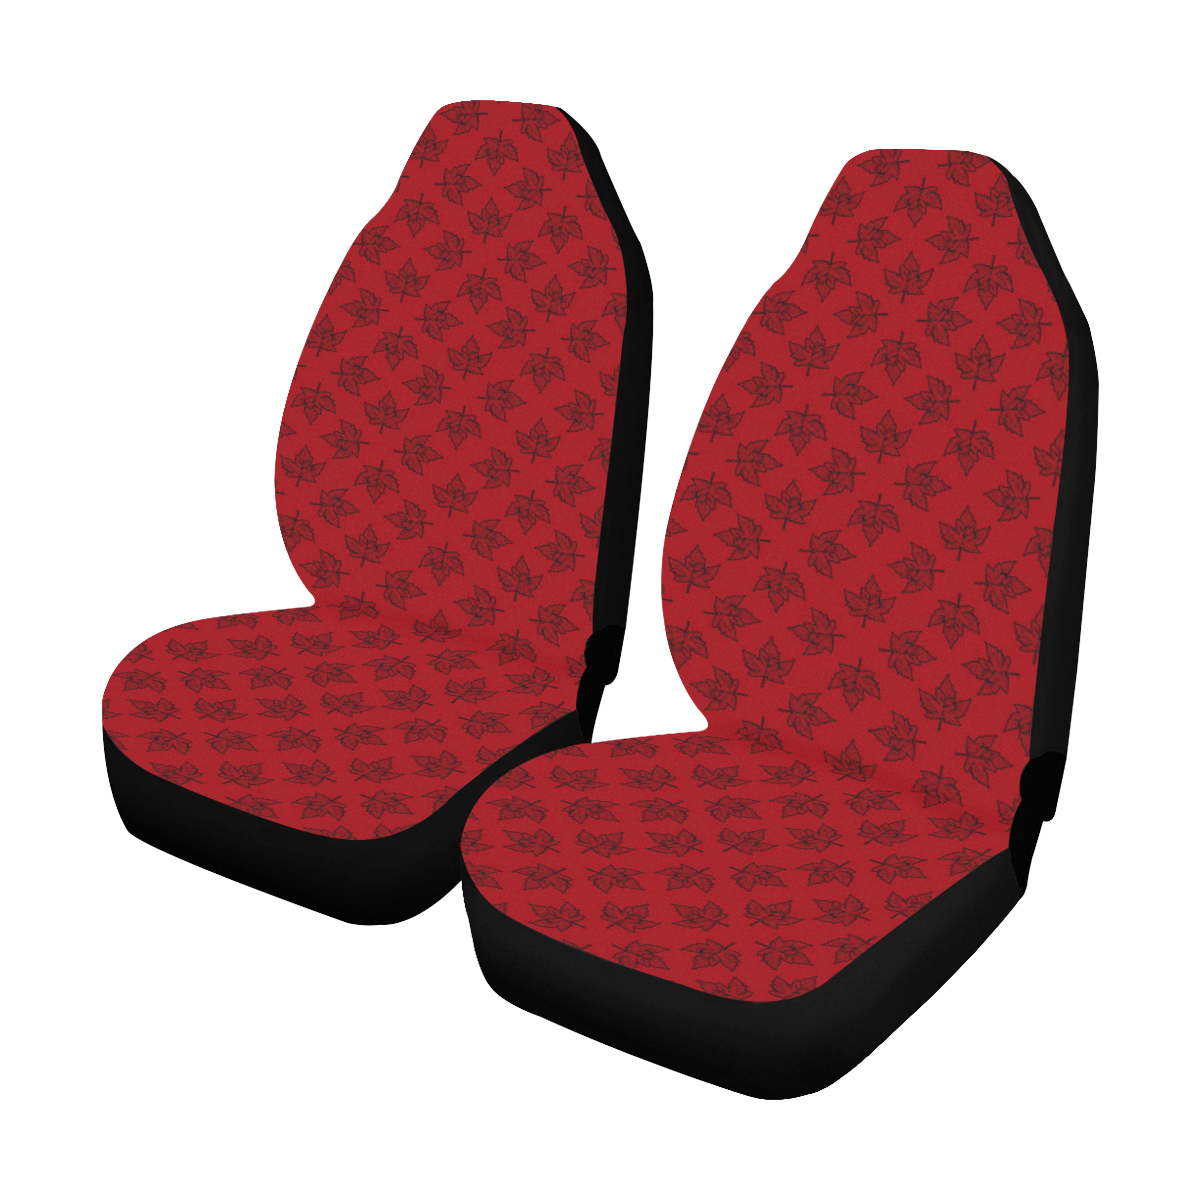 Cool Canada Retro Red Car Seat Covers (Set of 2)